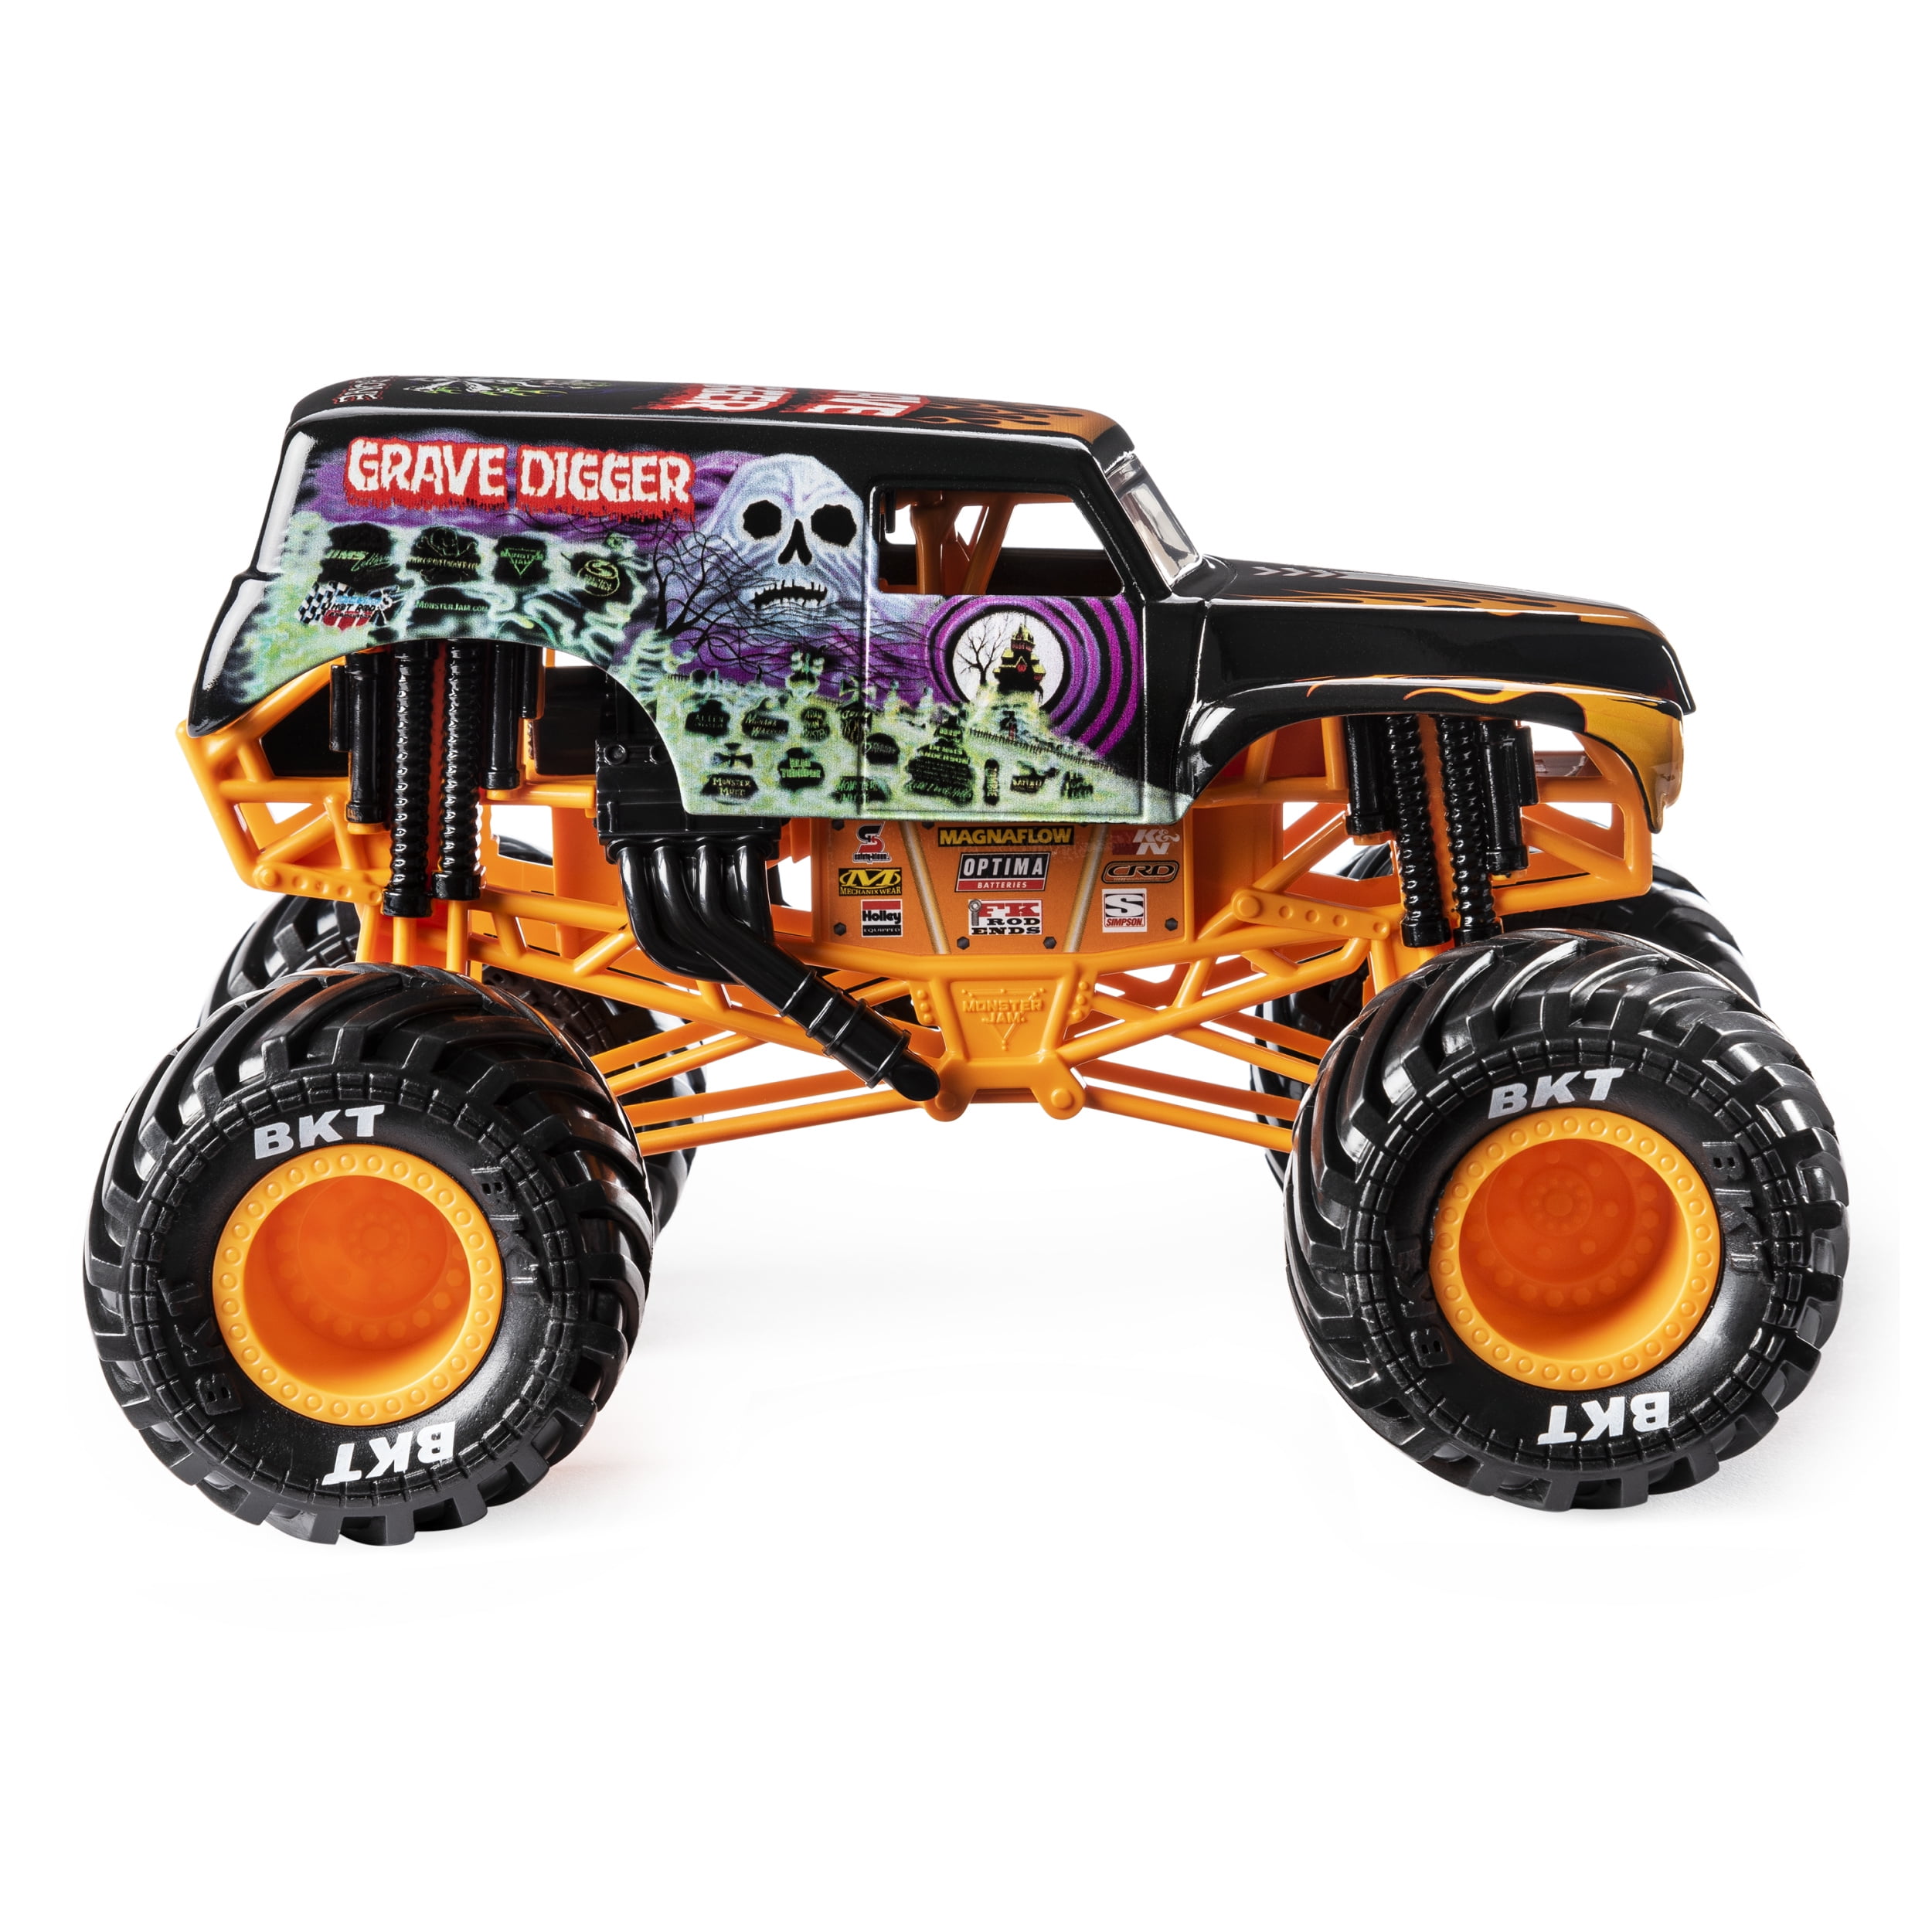 Sunny Brinquedos Monster Jam - 1:24 Collector Die Cast Trucks Grave Digger  C9, Multicor